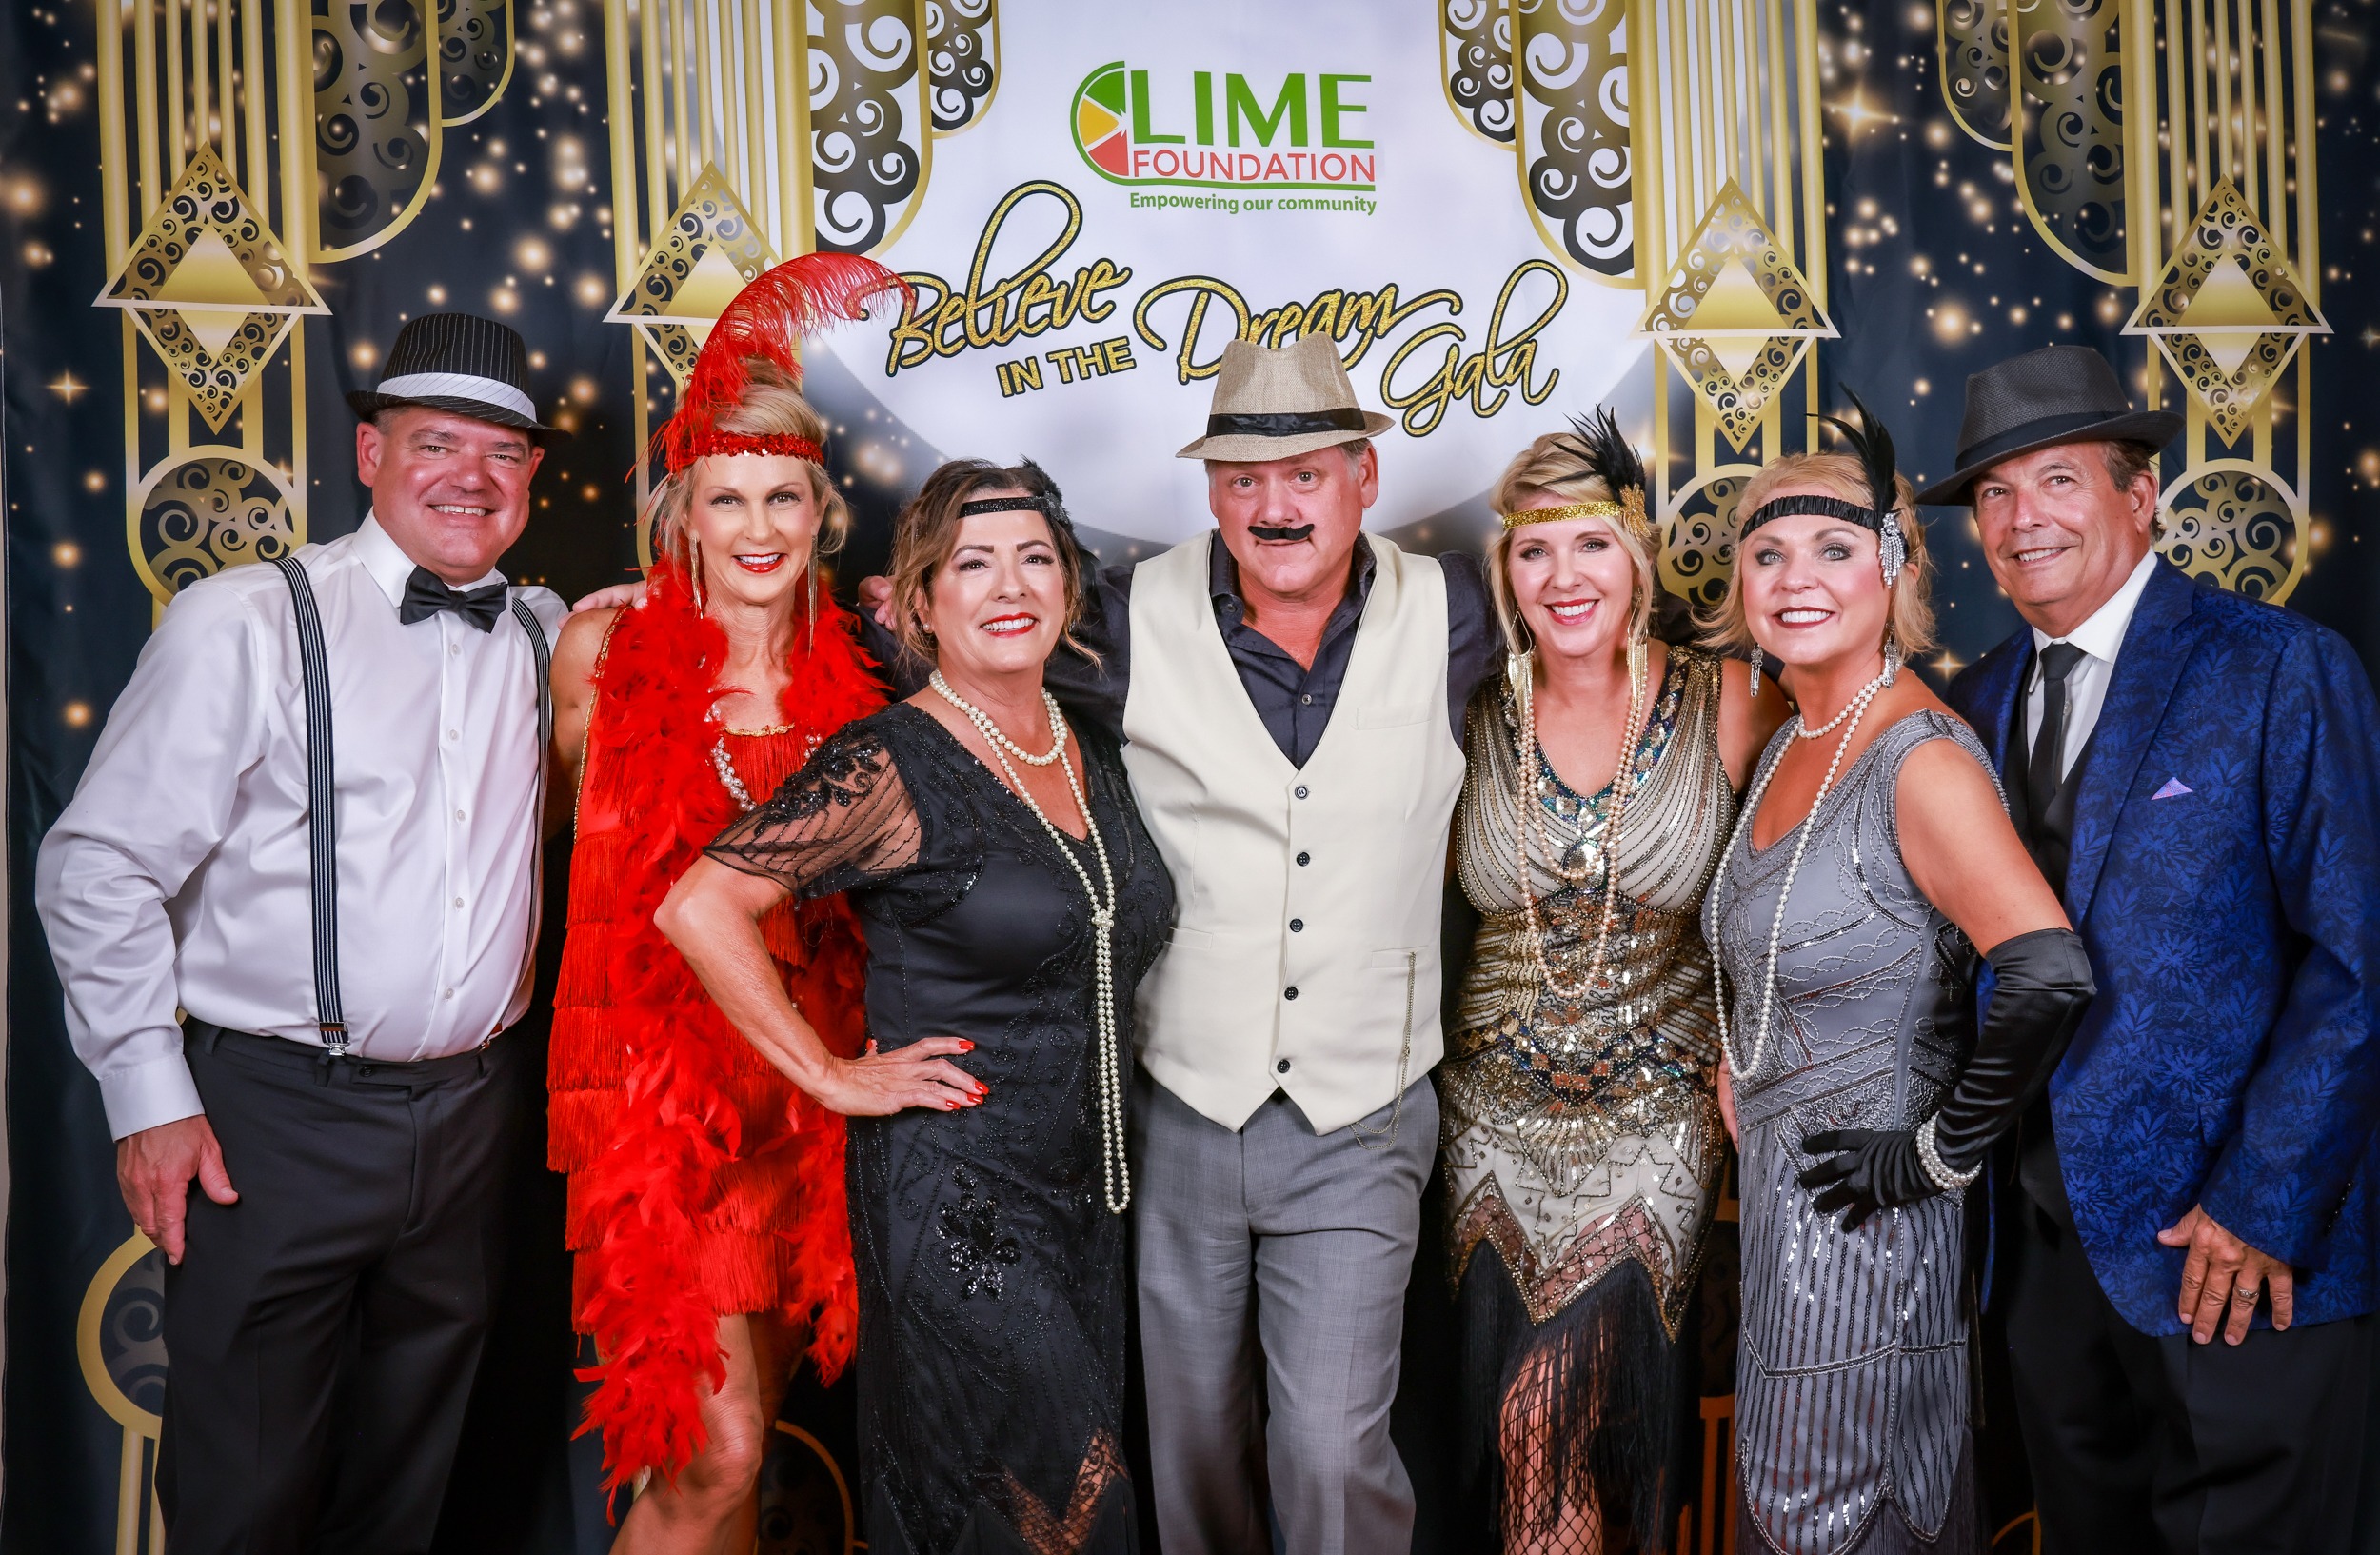 A group of people posing for a photo at a Gatsby themed party hosted by The LIME Foundation of Santa Rosa.